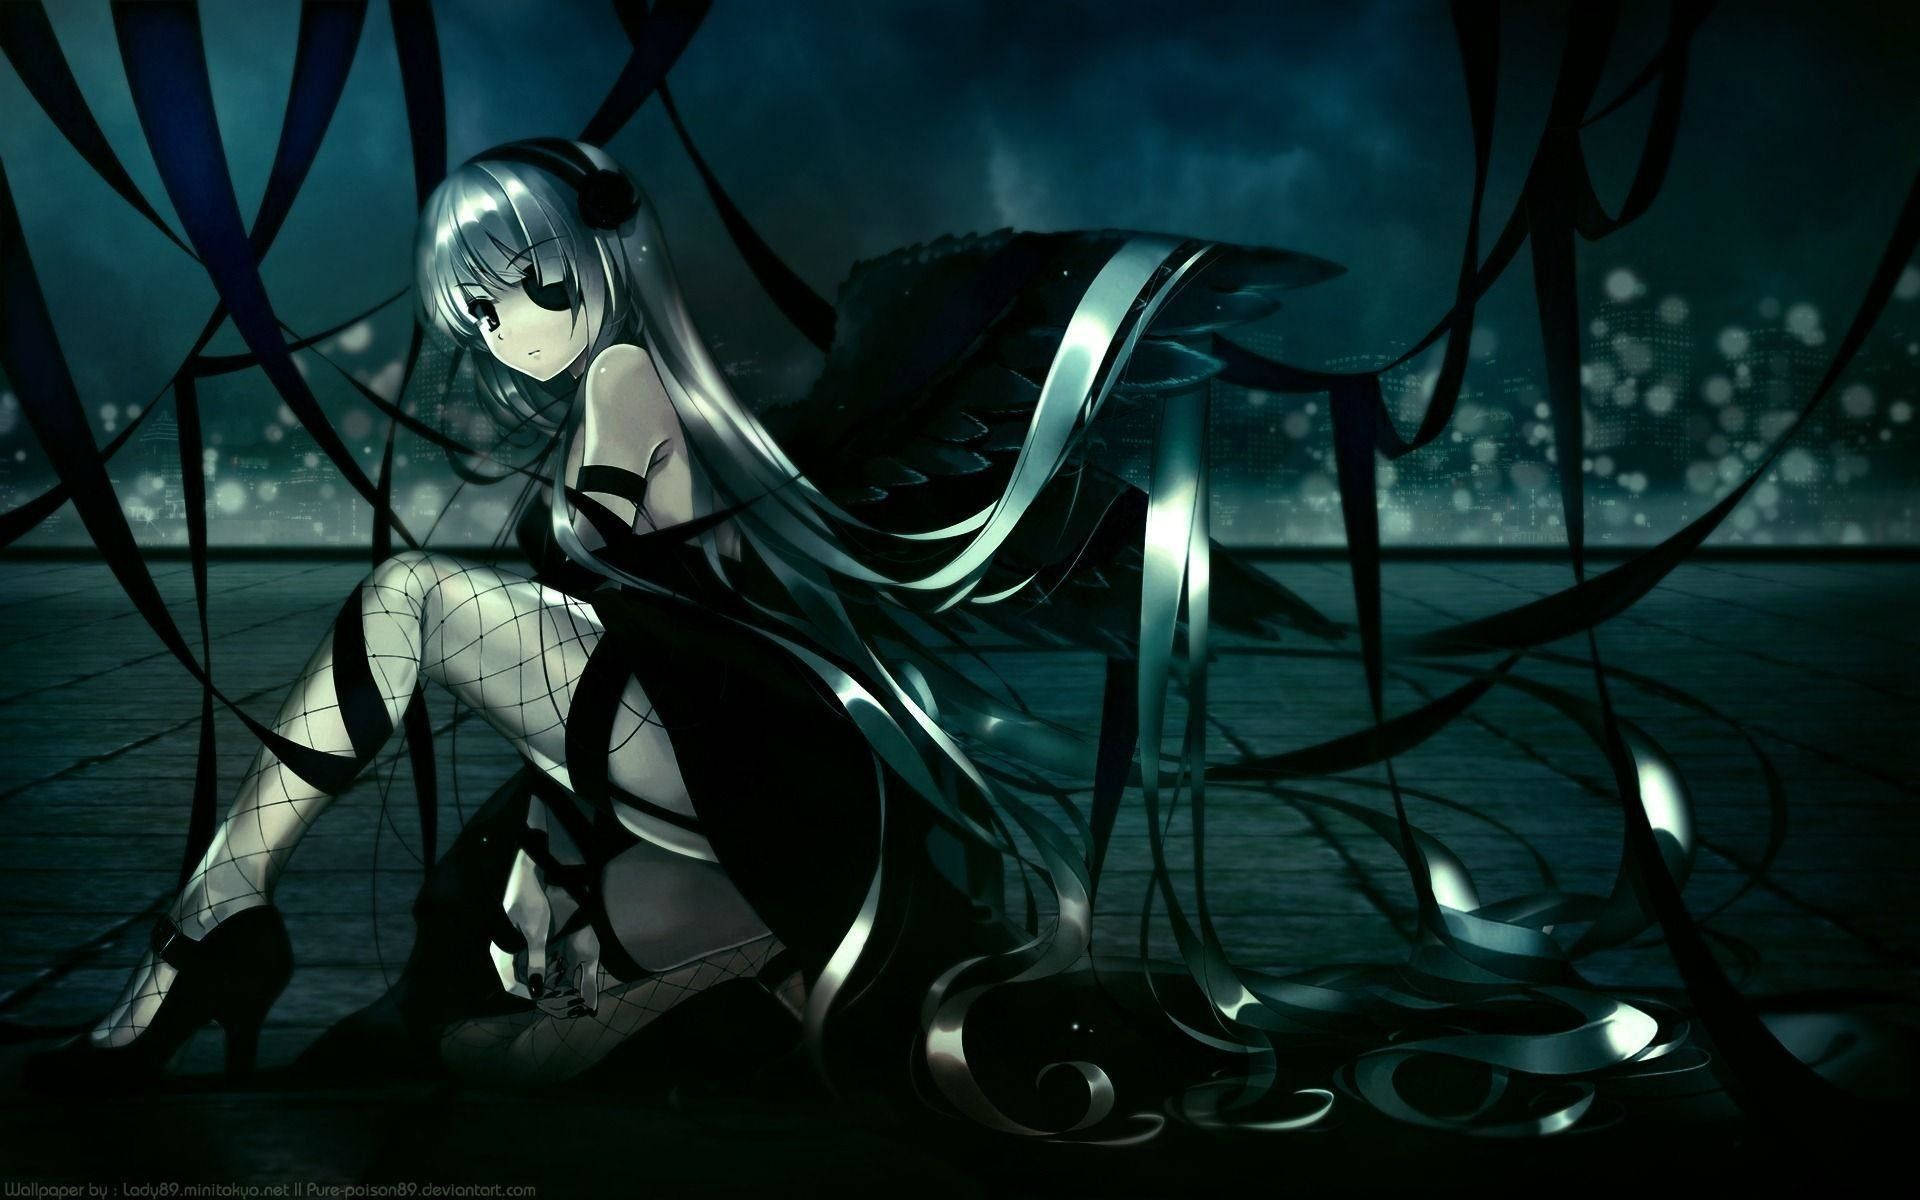 A dark and brooding anime character Wallpaper